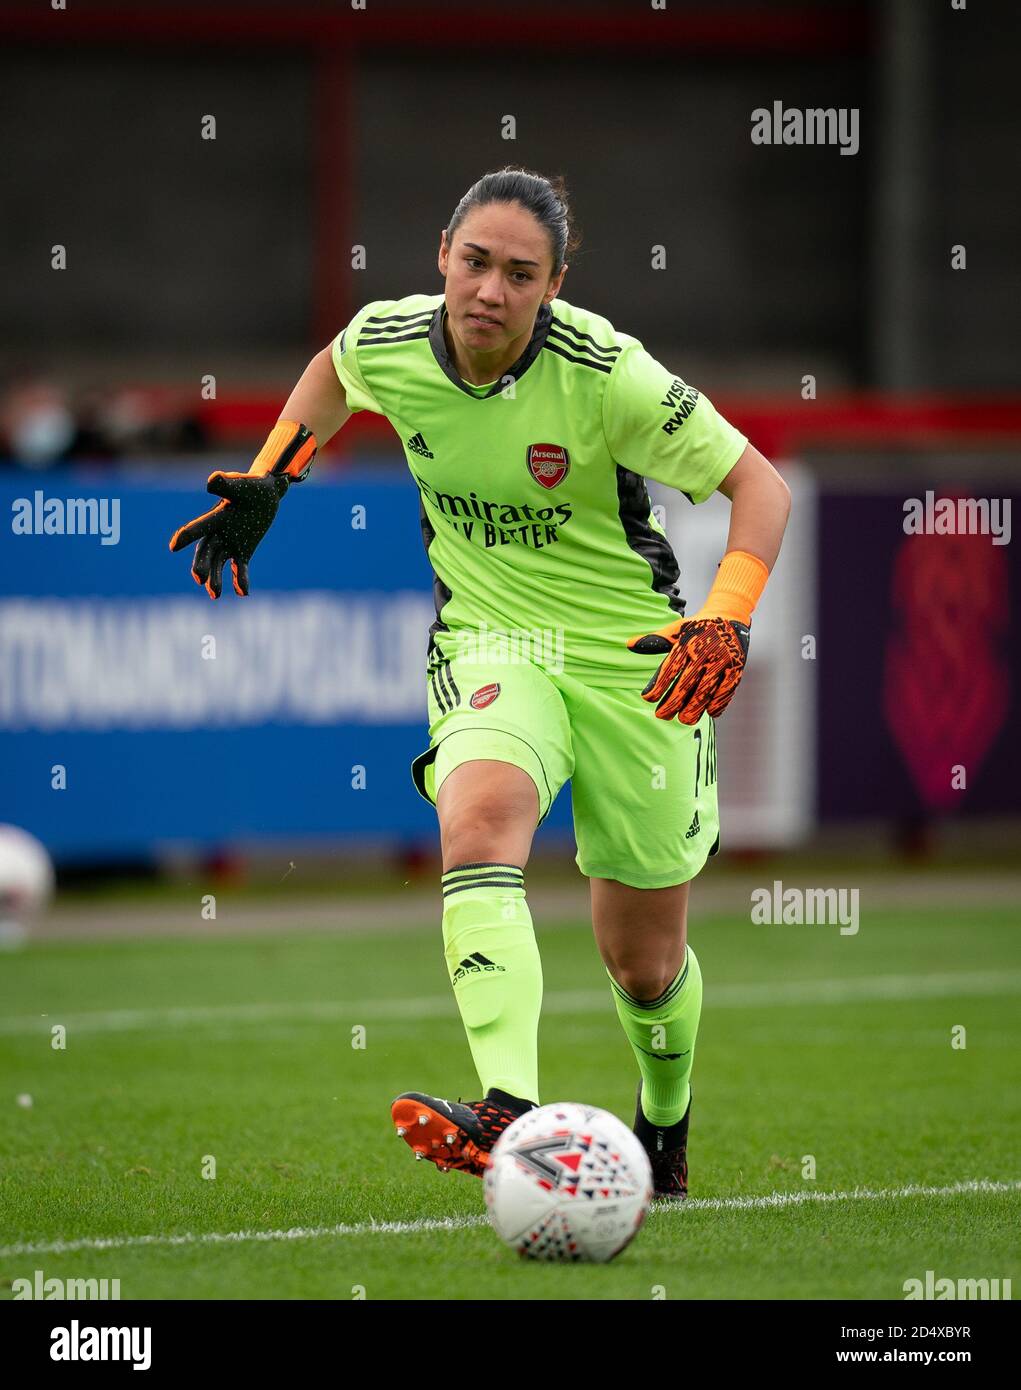 Crawley, UK. 11th Oct, 2020. Goalkeeper Manuela Zinsberger of Arsenal during the FAWSL match between Brighton and Hove Albion and Arsenal Women at The People's Pension Stadium, Crawley, England on 11 October 2020. Photo by Andy Rowland. Credit: PRiME Media Images/Alamy Live News Stock Photo